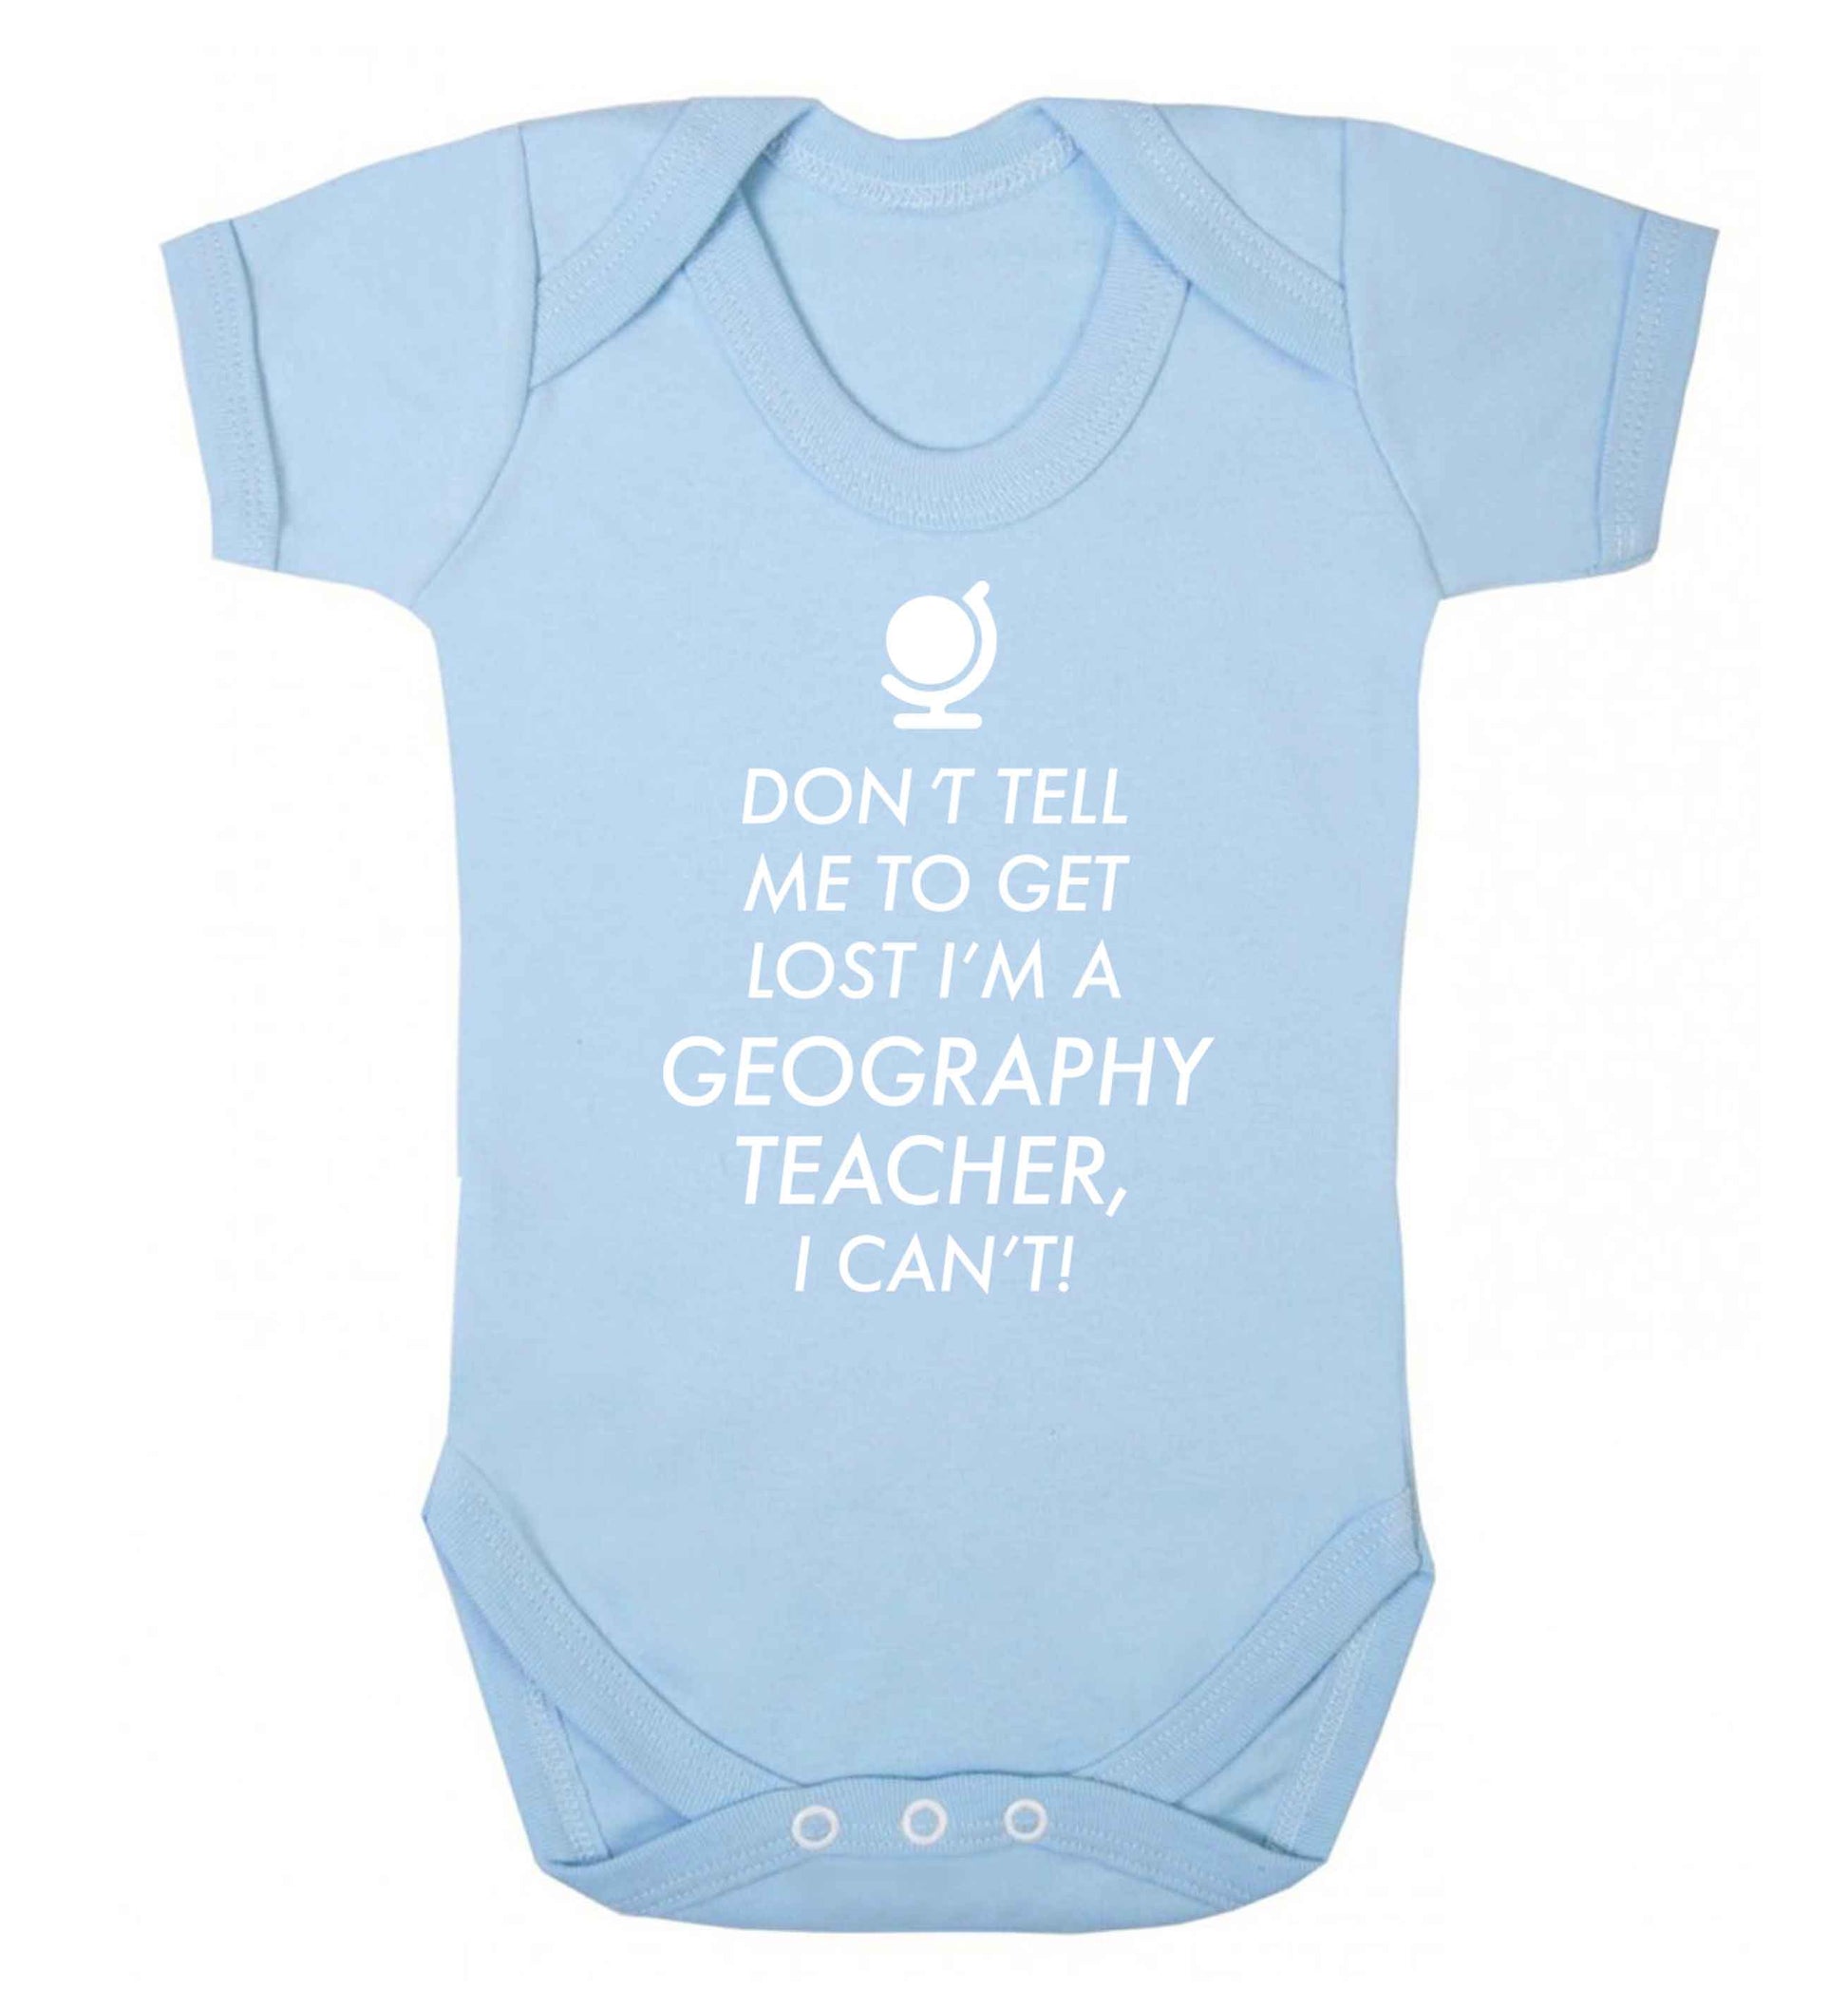 Don't tell me to get lost I'm a geography teacher, I can't Baby Vest pale blue 18-24 months